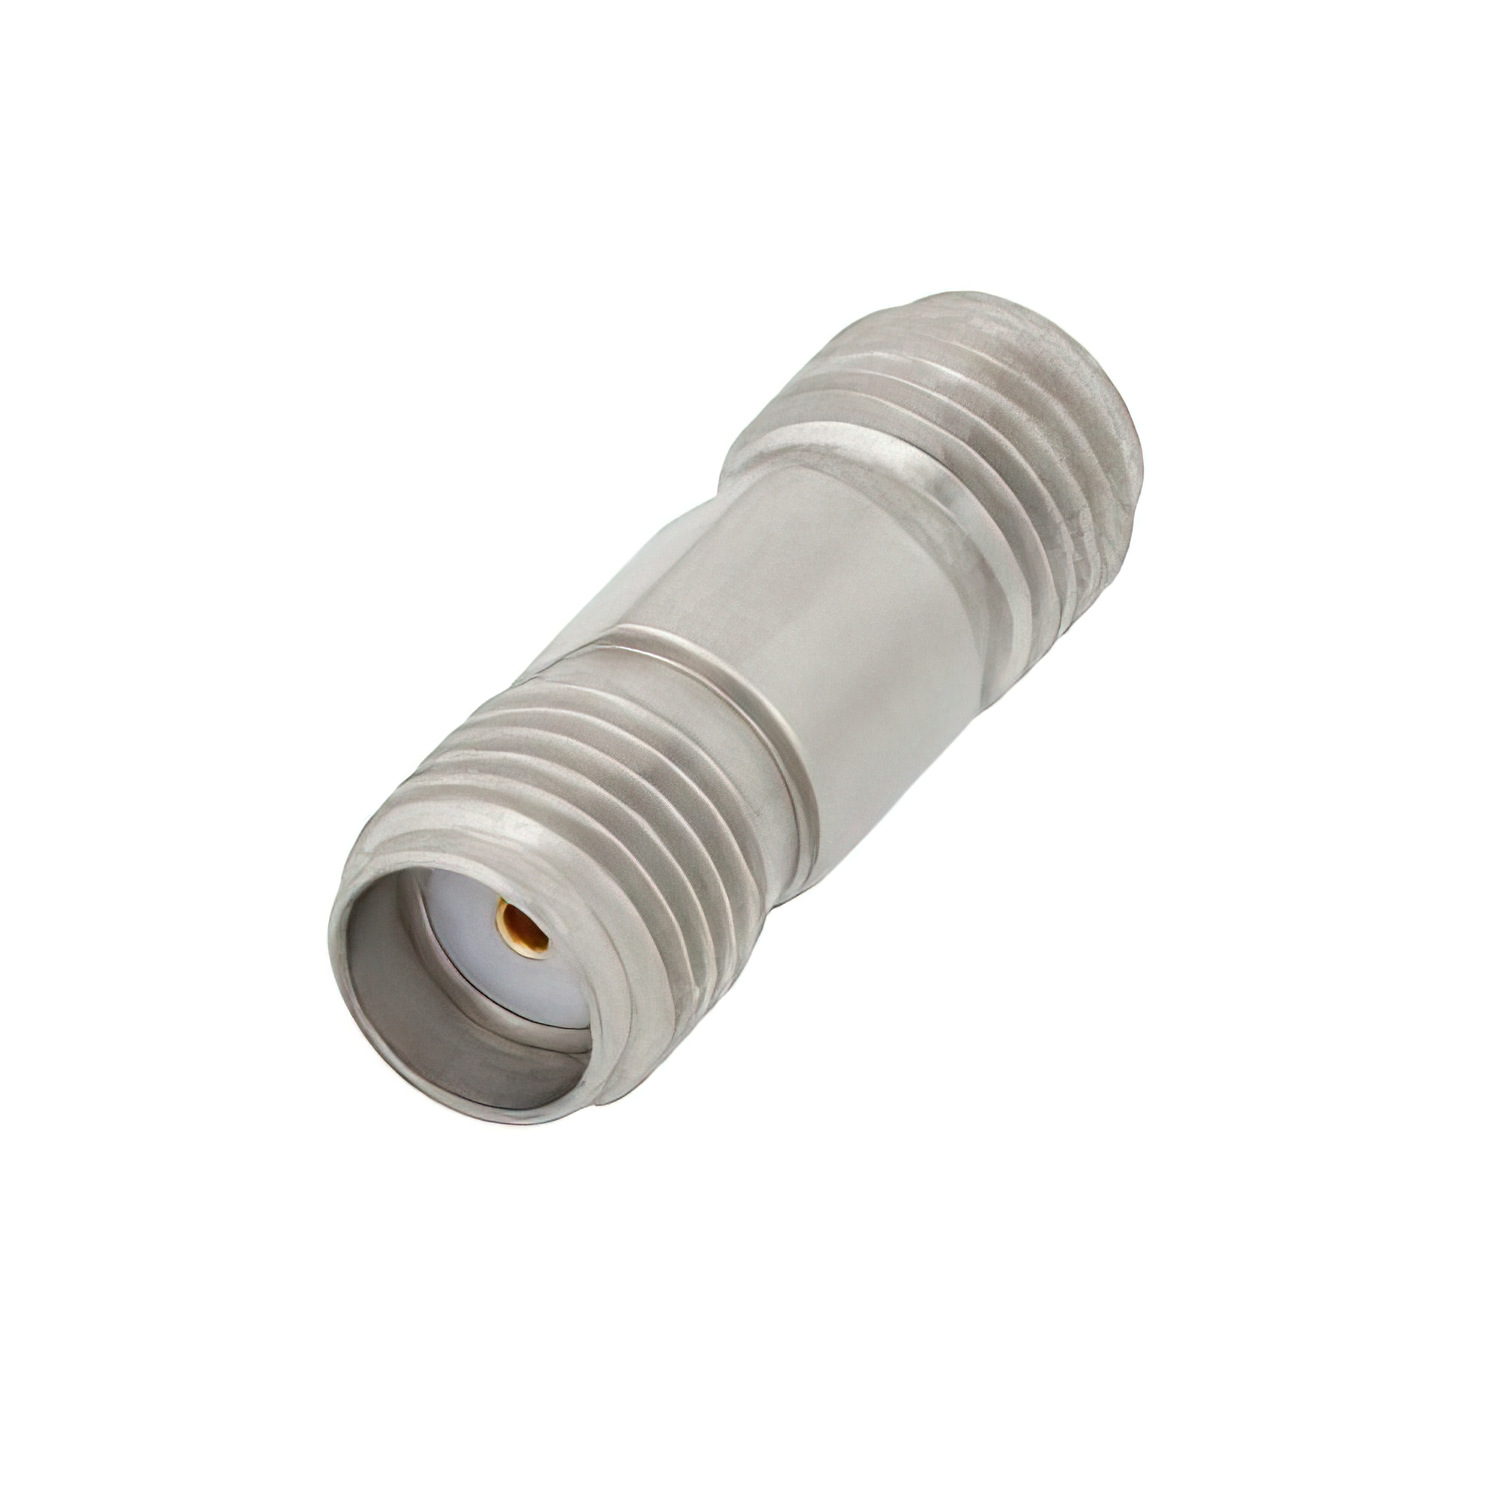 SMA Female to 3.5mm Female Adapter1